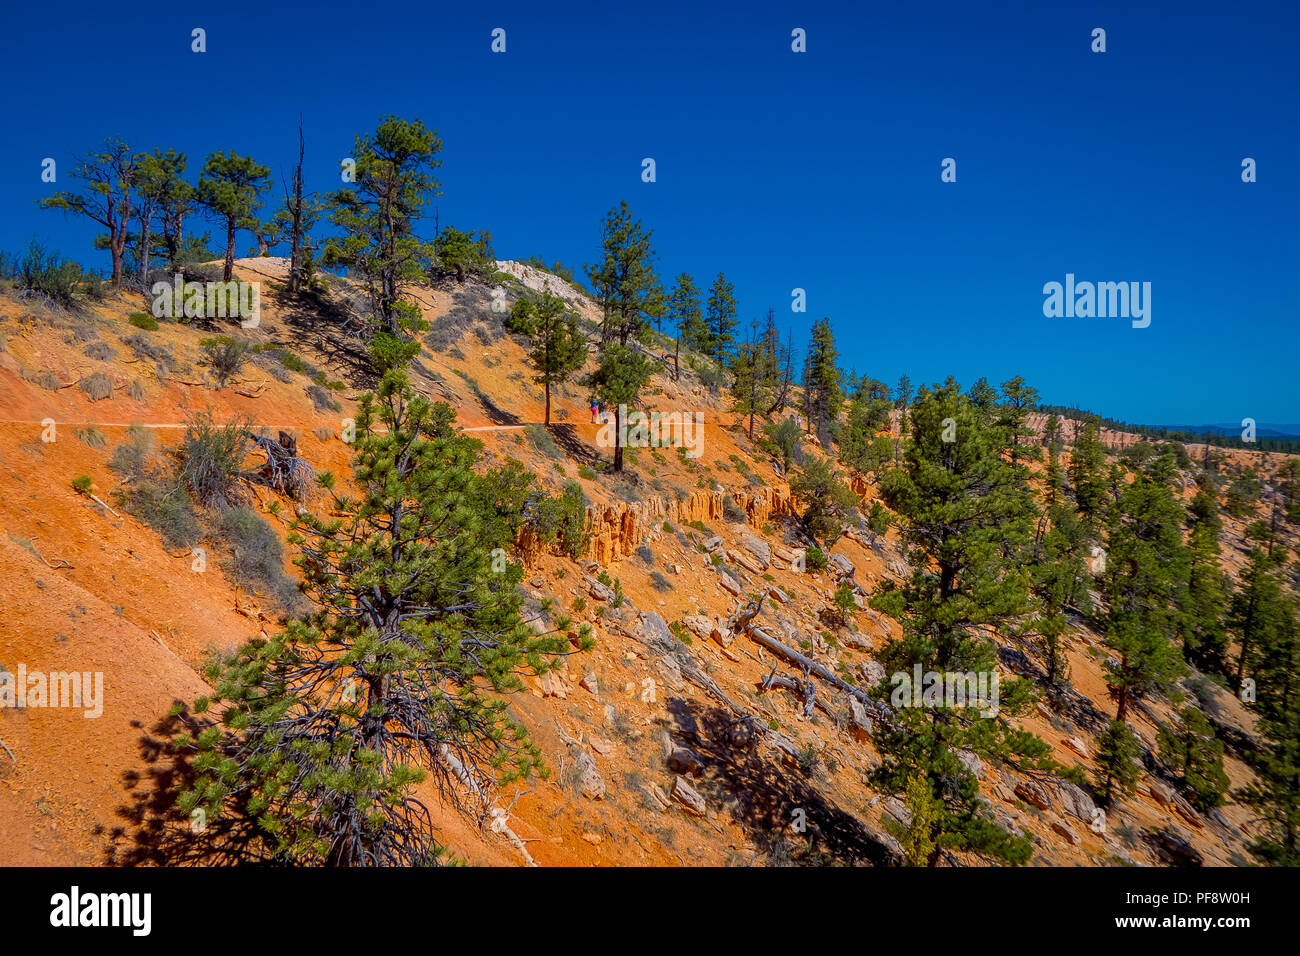 Beautiful outdoor view of pinyon pine tree forest Bryce Canyon National Park Utah Stock Photo